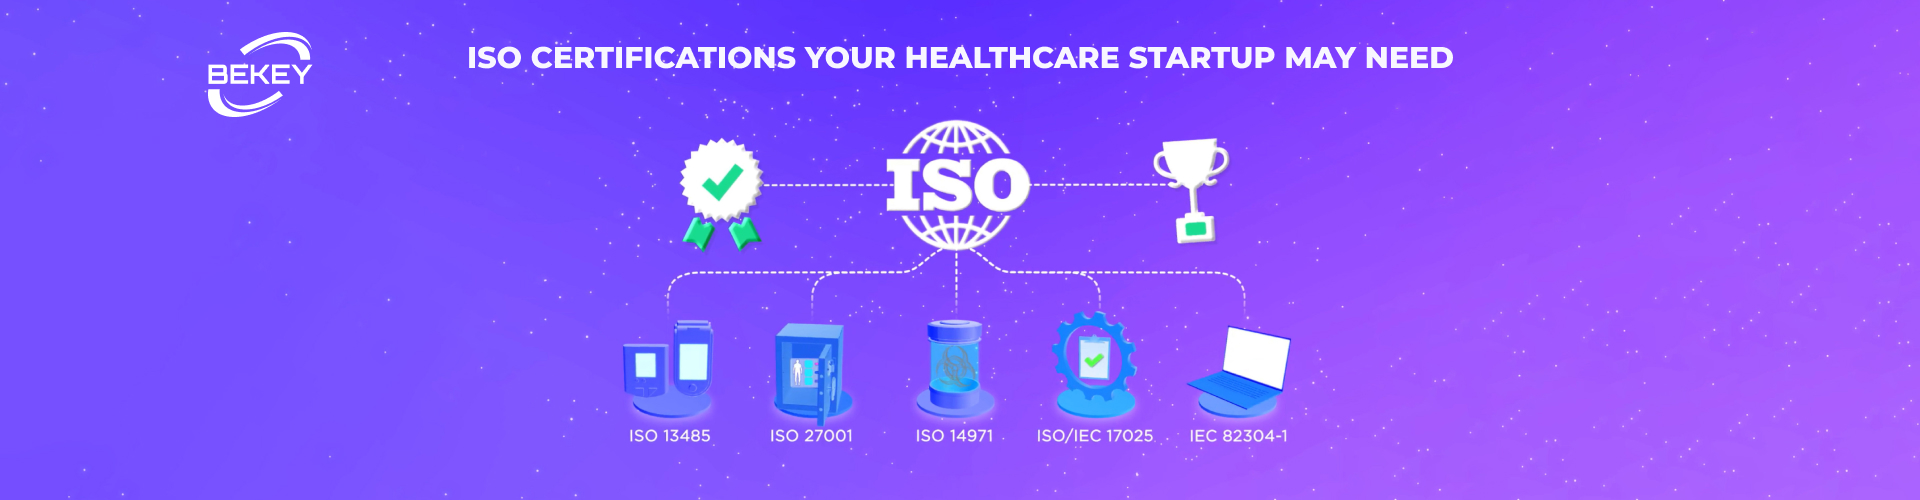 ISO Certifications Your Healthcare Startup May Need - image